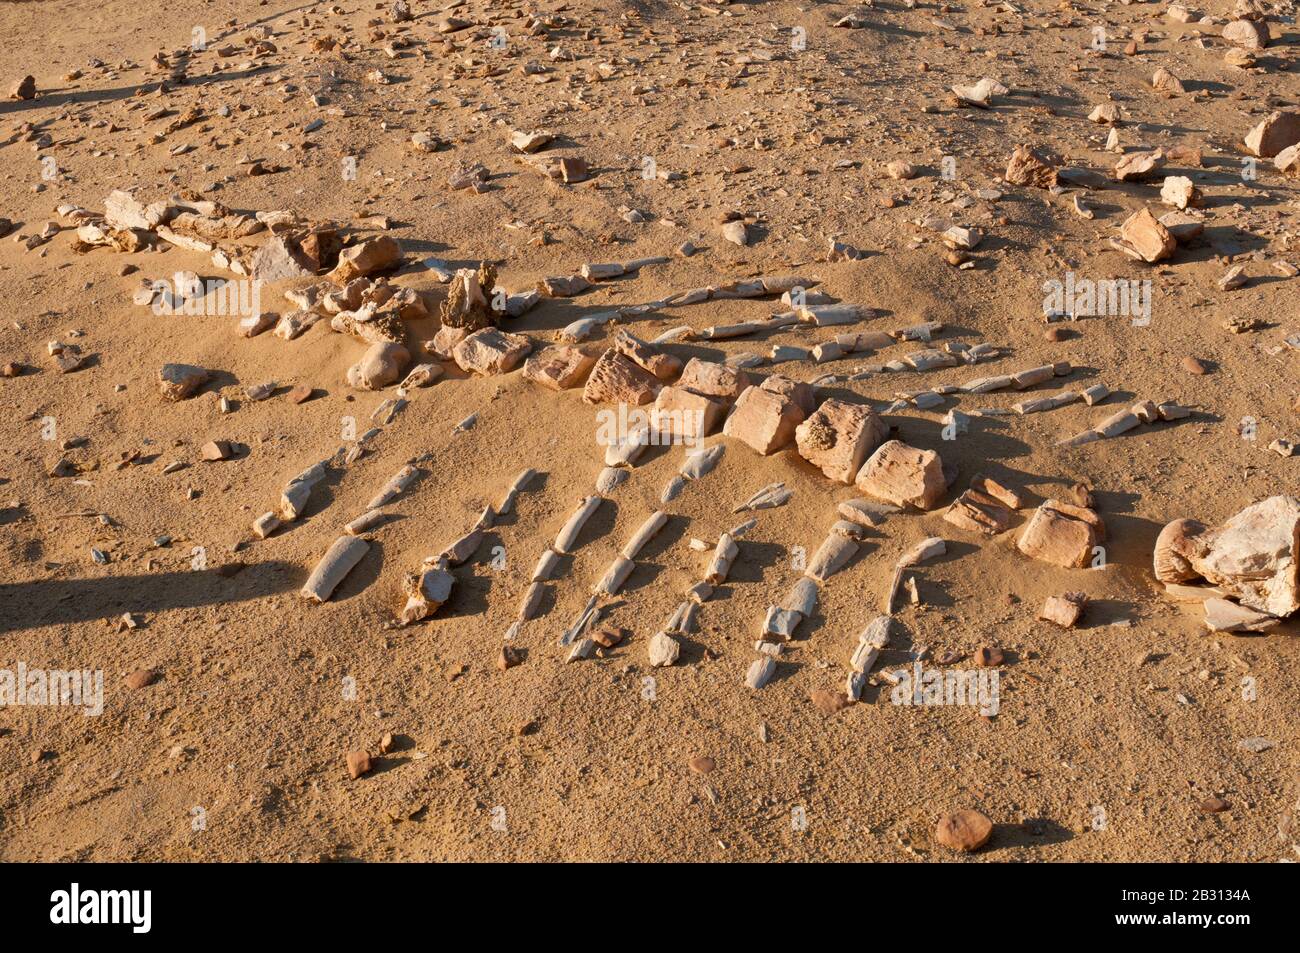 Whale skeleton exposed in sand at Wadi El Hitan, Valley of the Fossils, Egypt Stock Photo